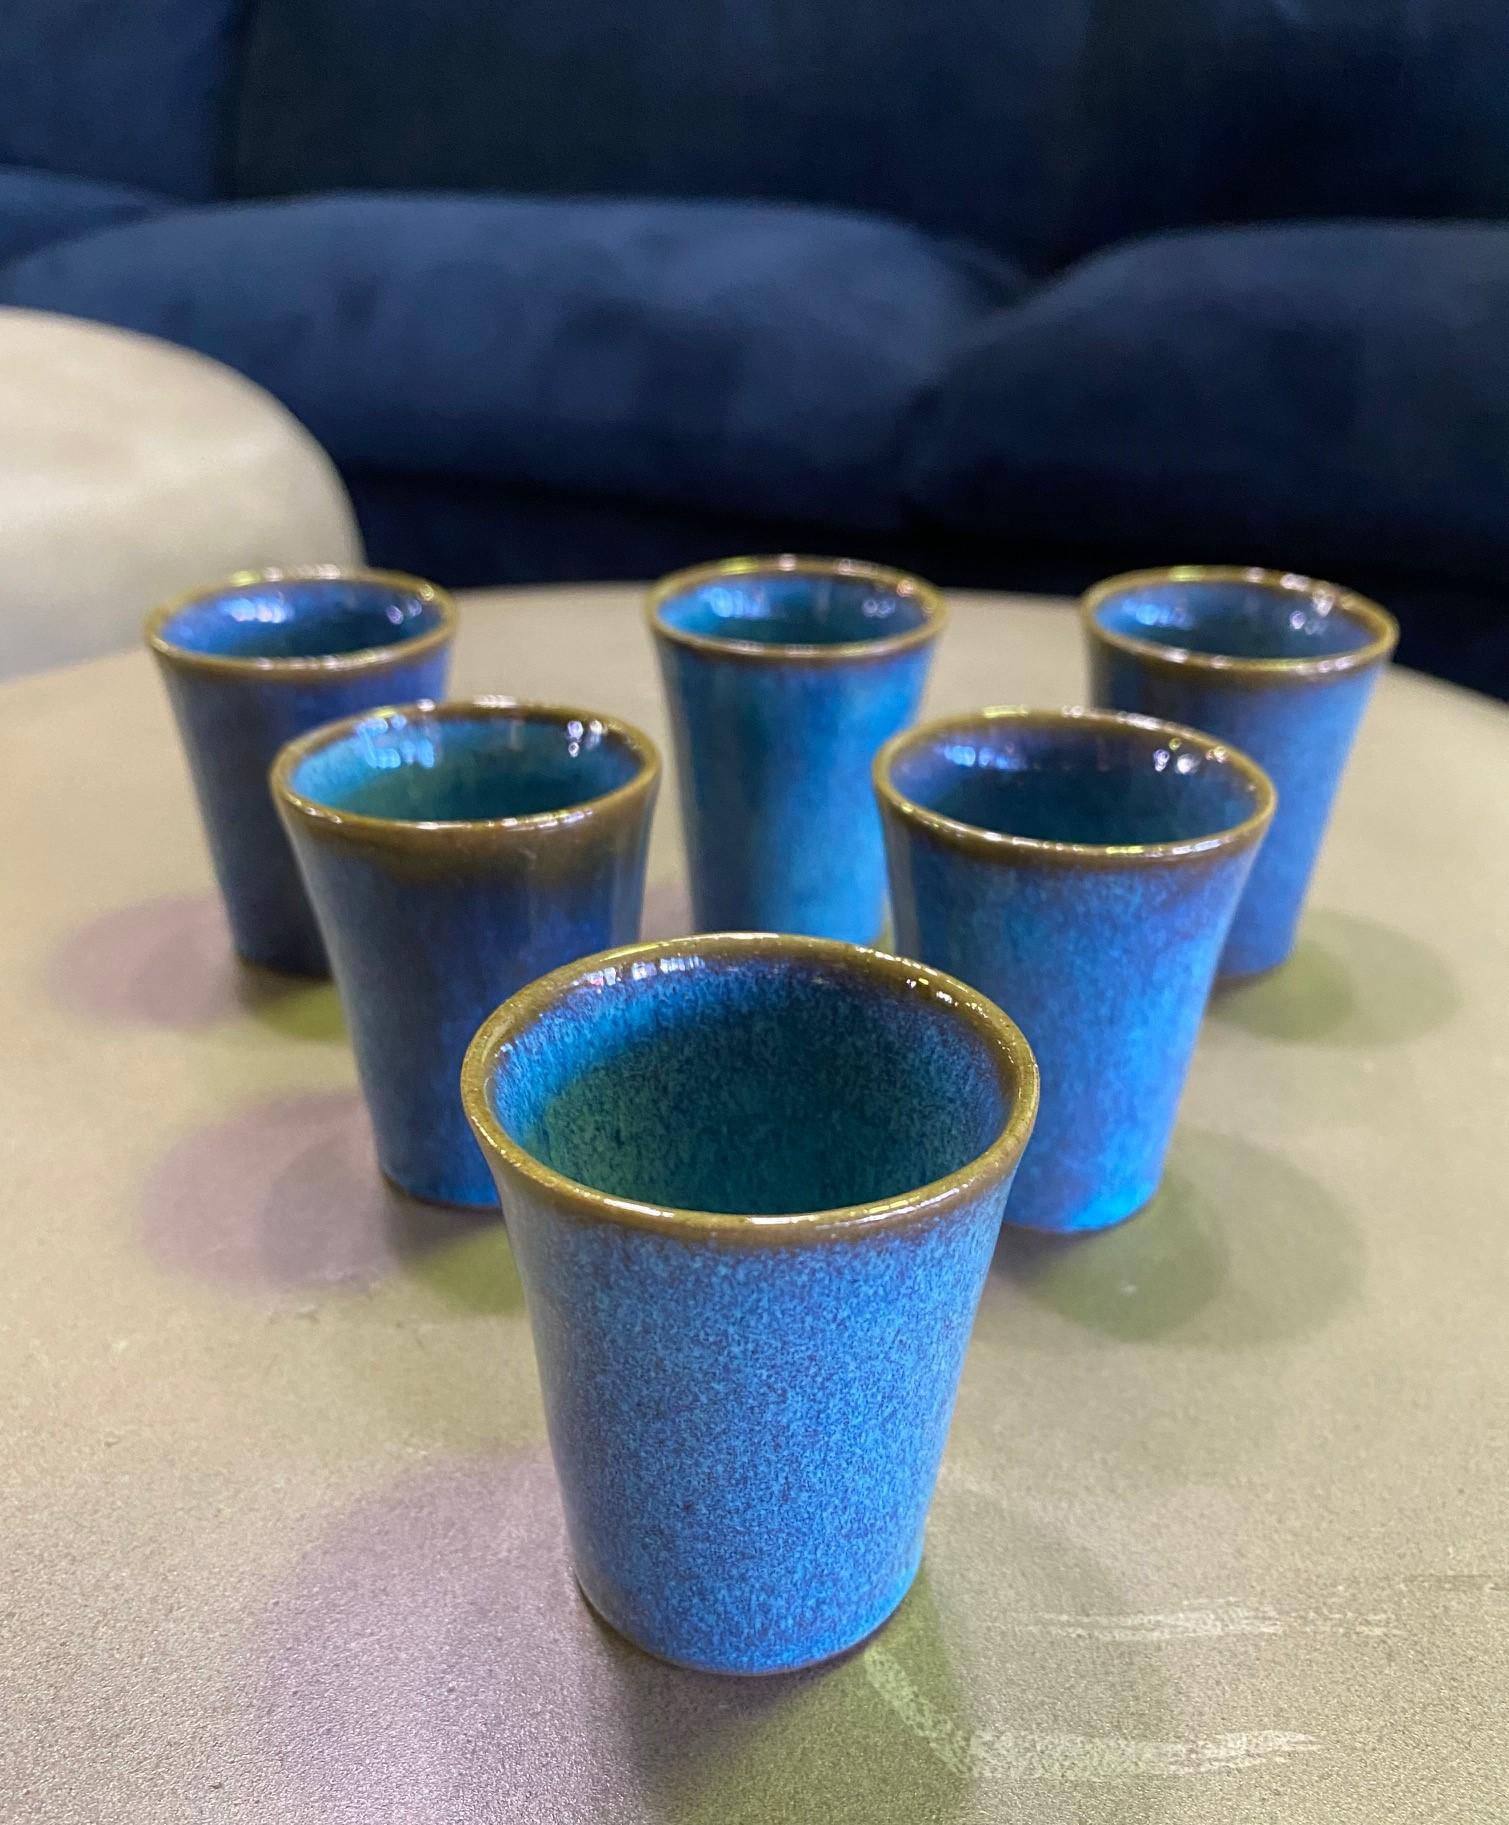 An exquisitely formed and deeply blue glazed set of six ceramic sake/ liqueur cups by renowned American West Coast Californian master ceramist Harrison McIntosh who was famed for his Mid-Century Modern designed ceramics.

Mcintosh's works have